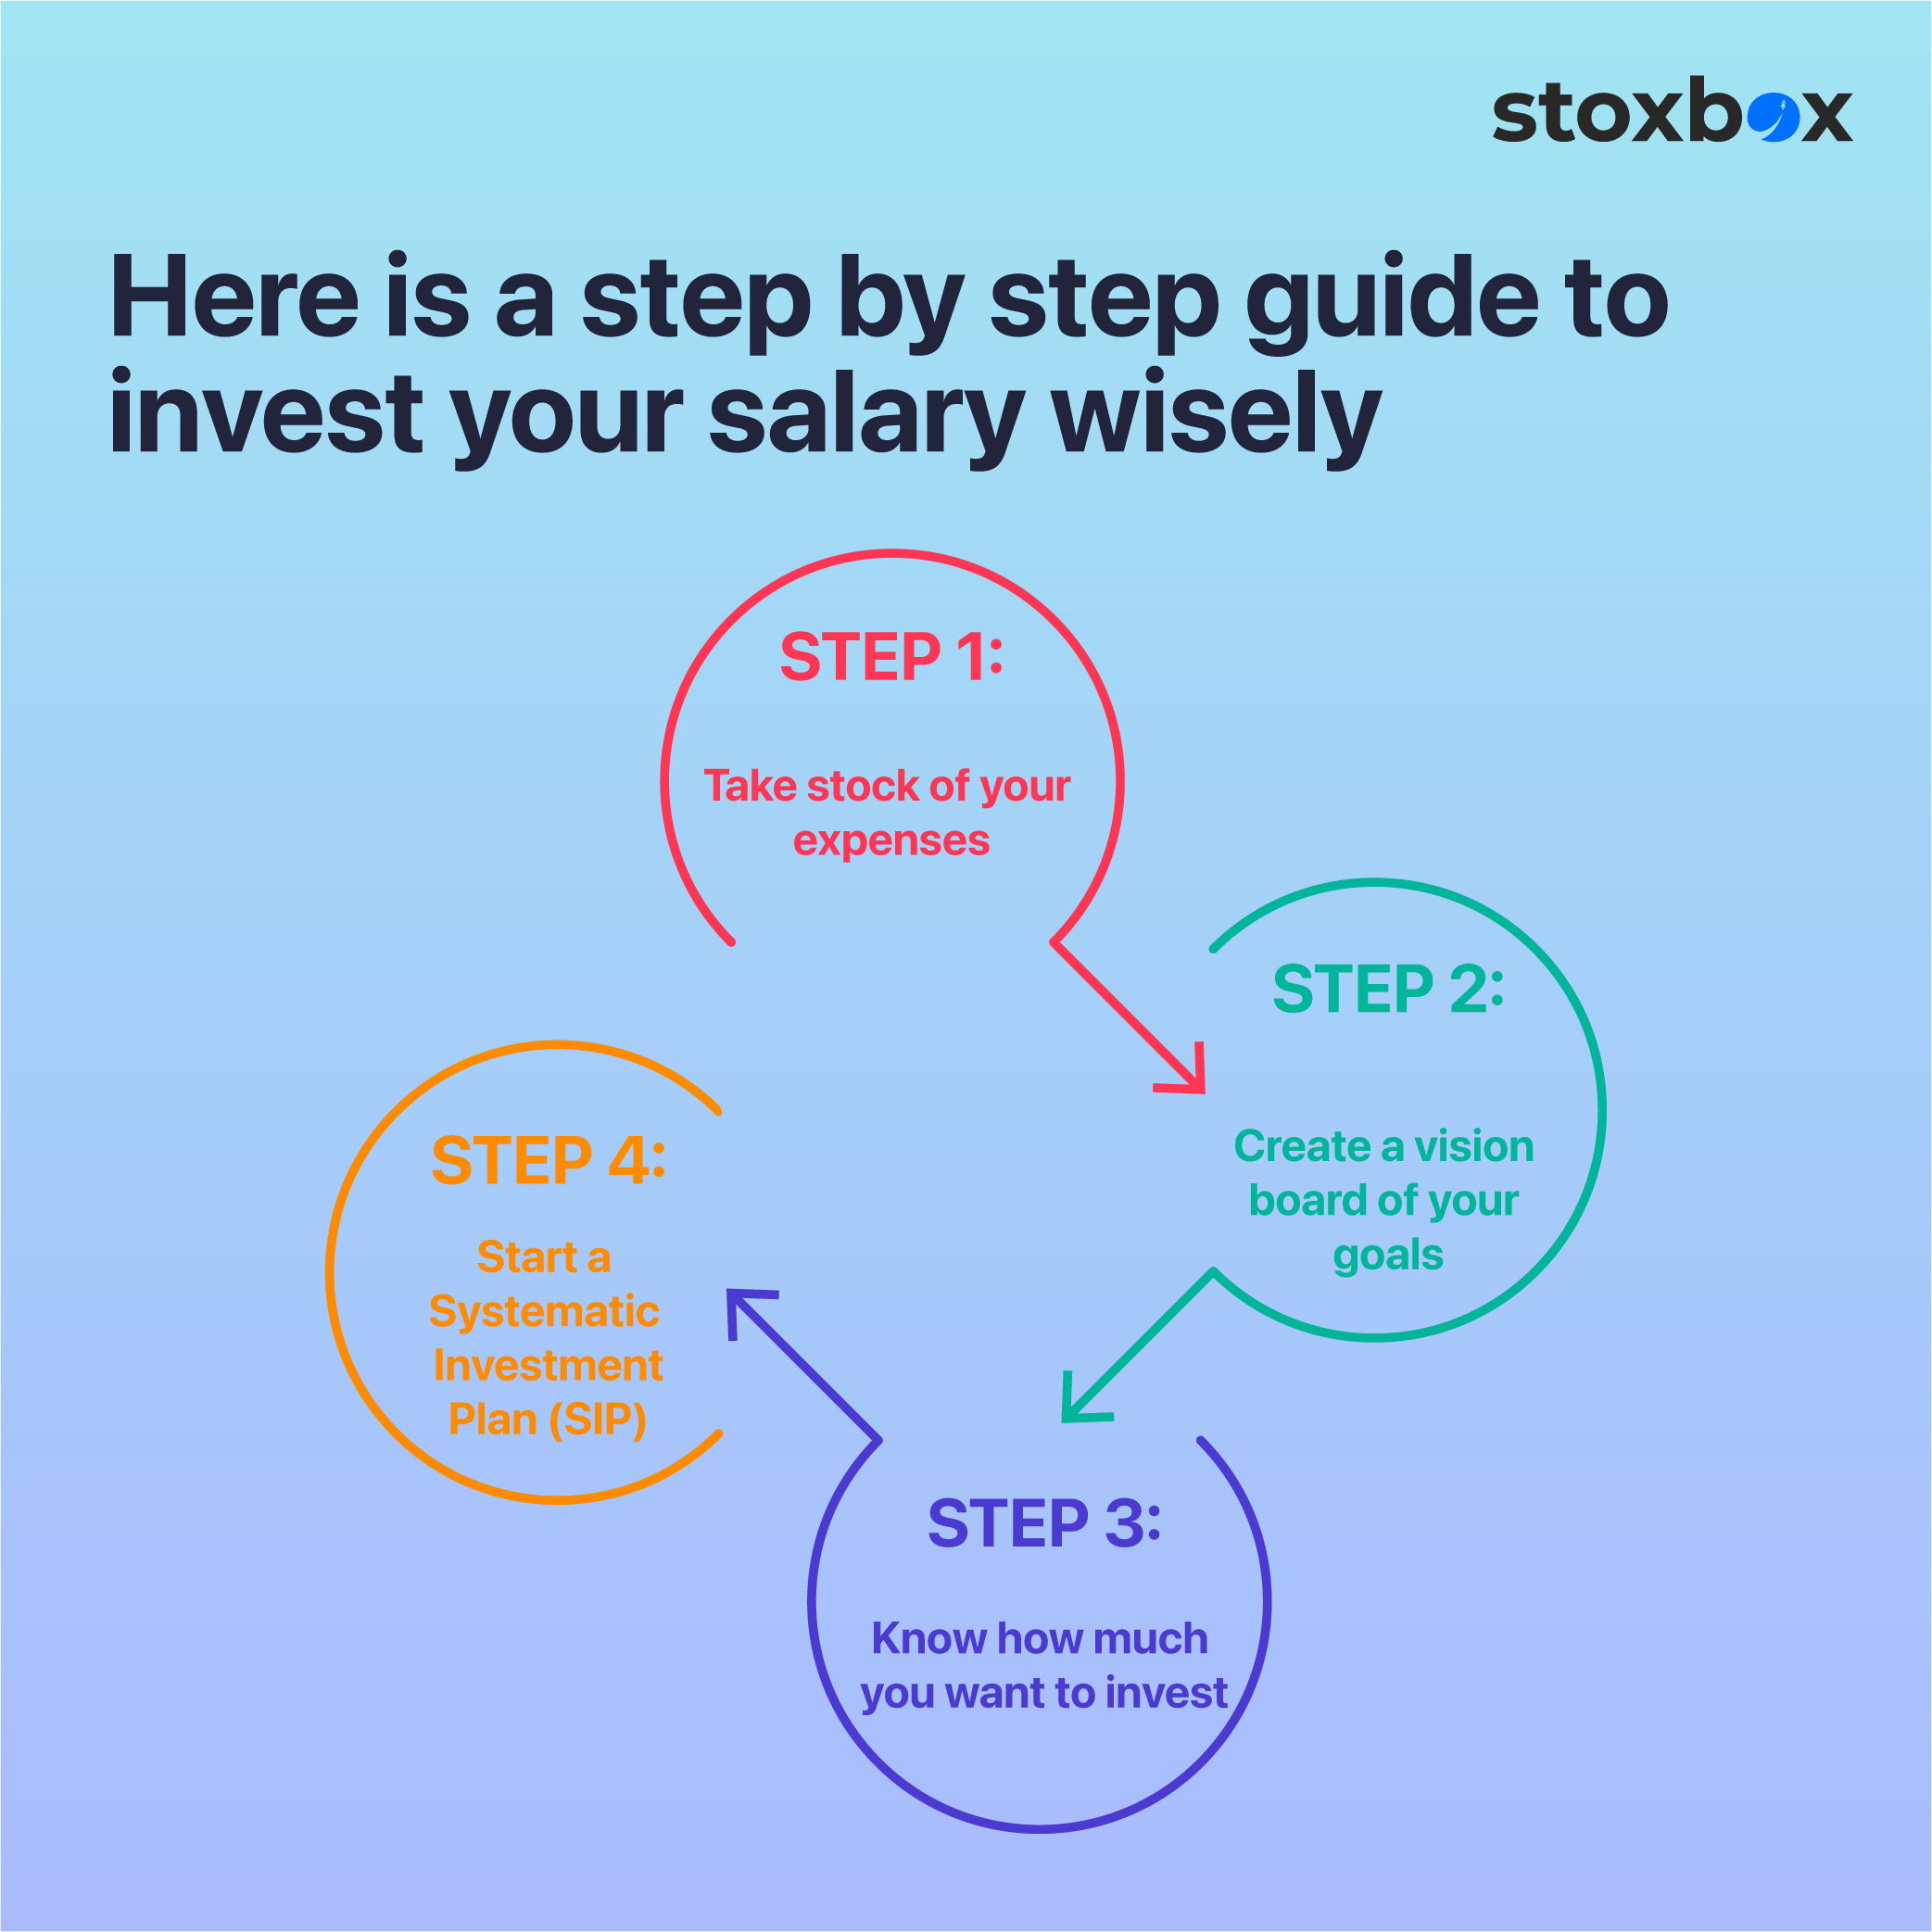 Investing your salary wisely